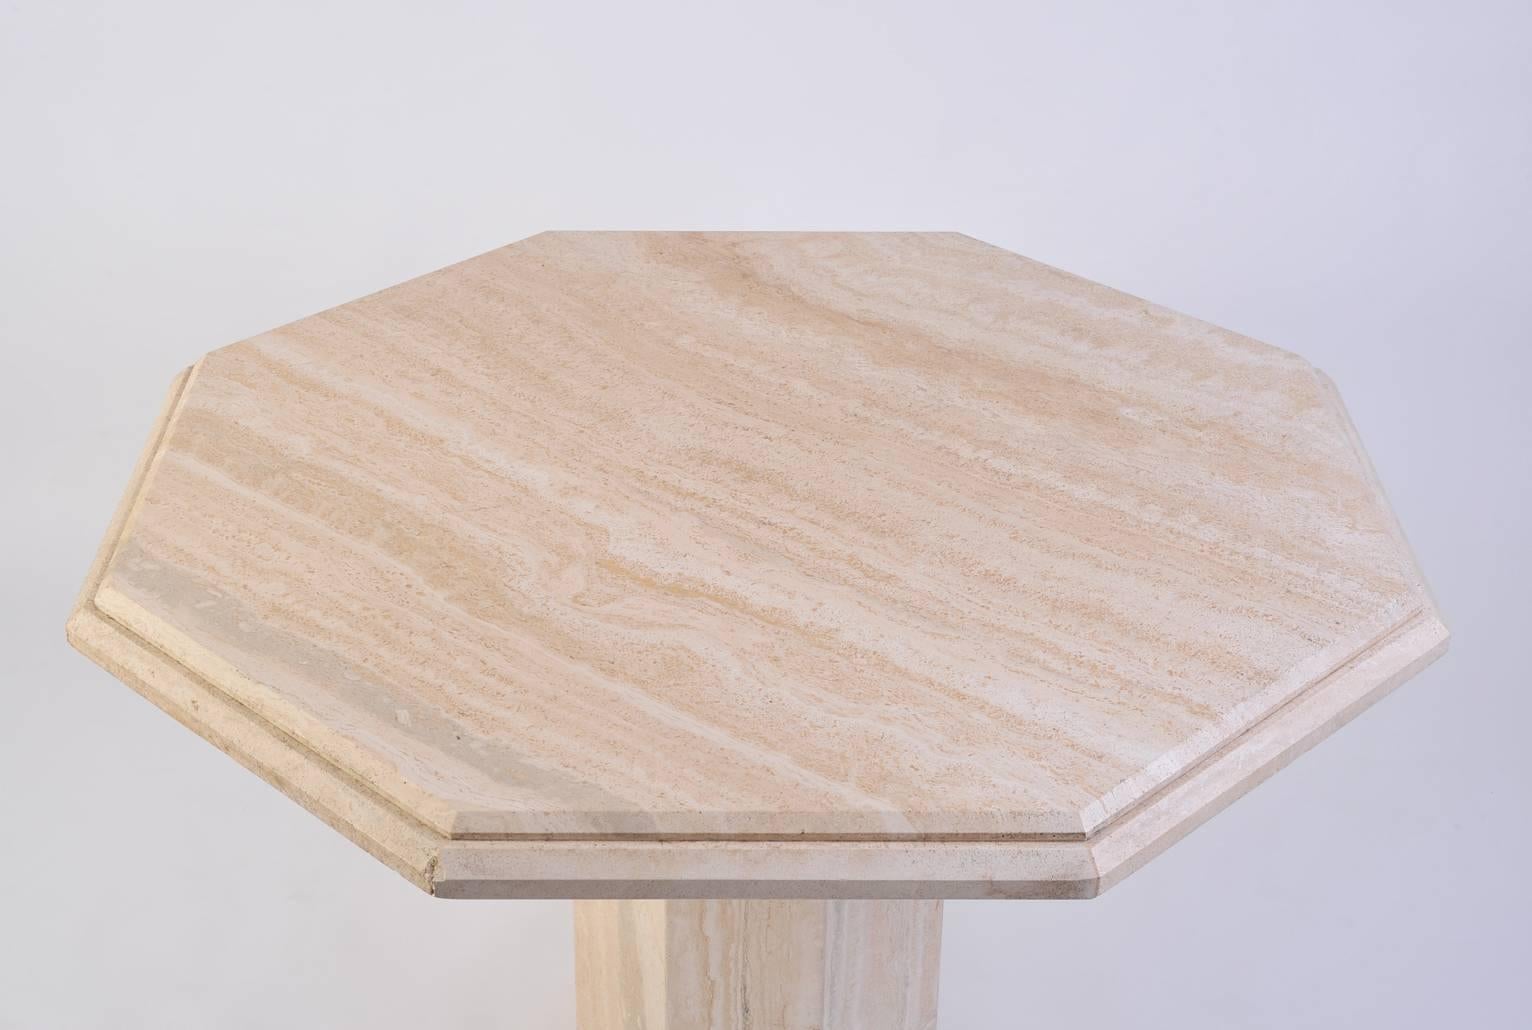 An octagonal travertine dining table
The octagonal base supporting a beveled edges top, 
Italy, circa 1975.